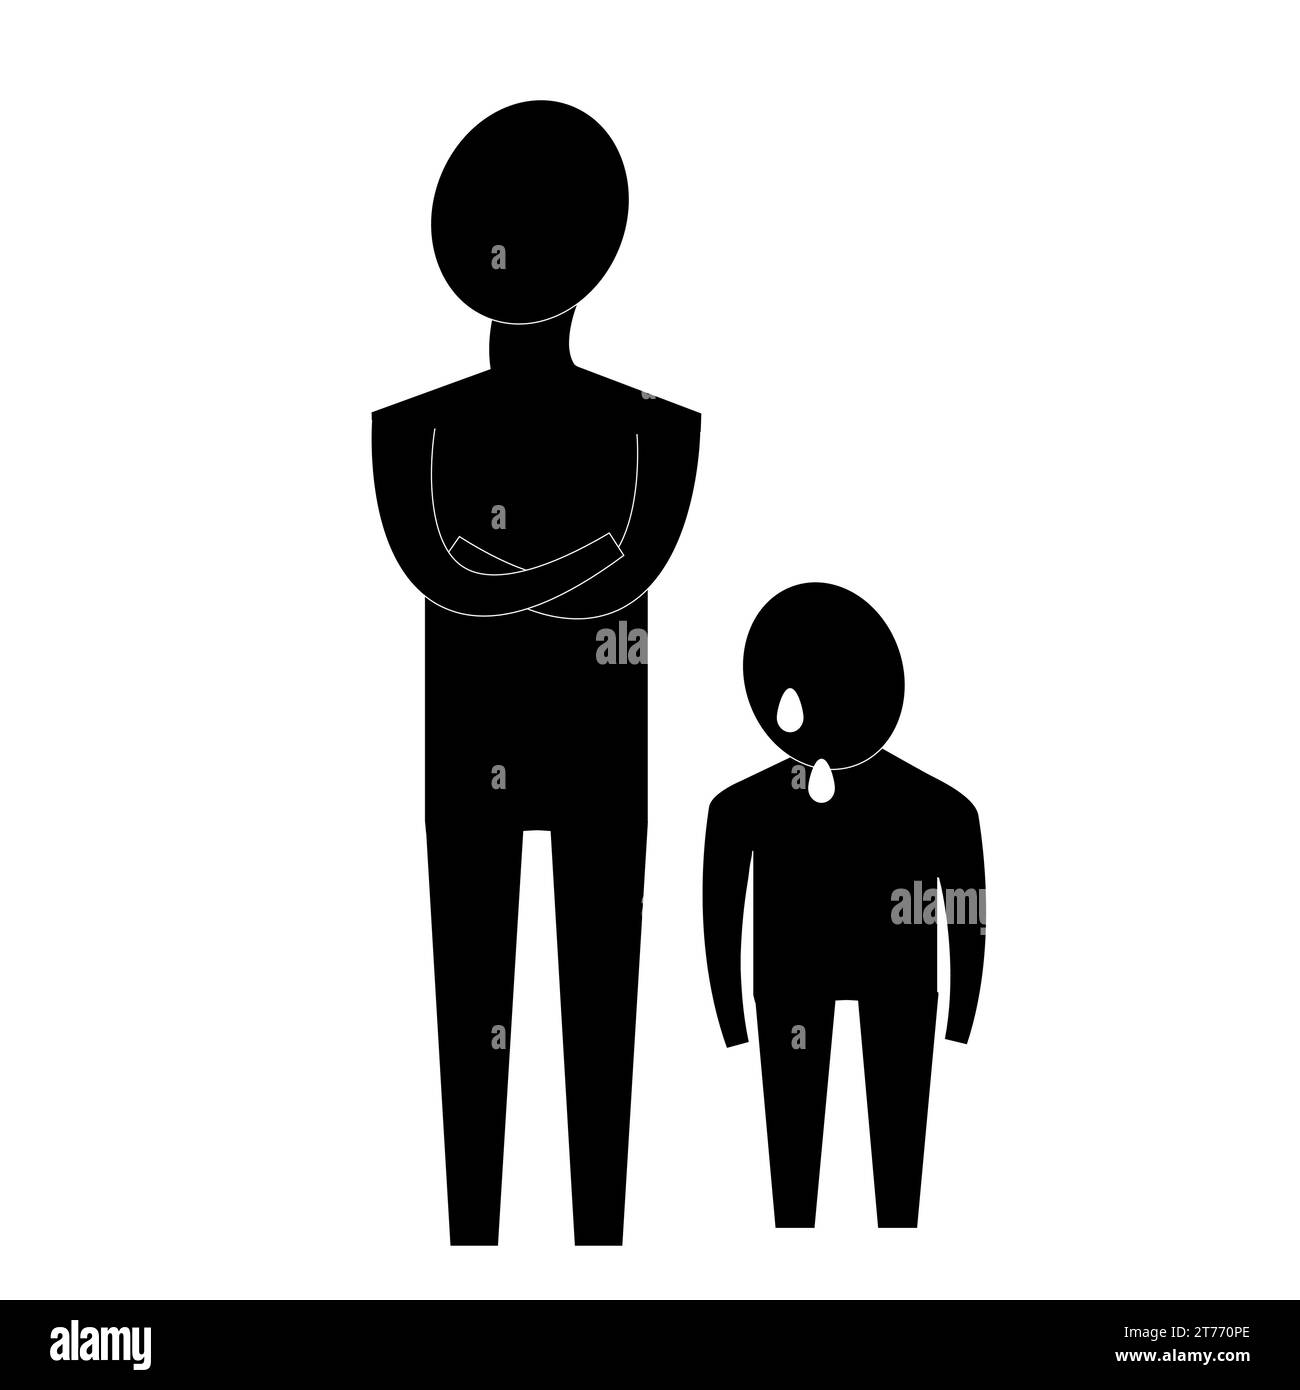 Infographics abusive parent not paying attention to crying child, denial of children's needs, neglect, narcissistic parent or guardian. The icon depic Stock Vector